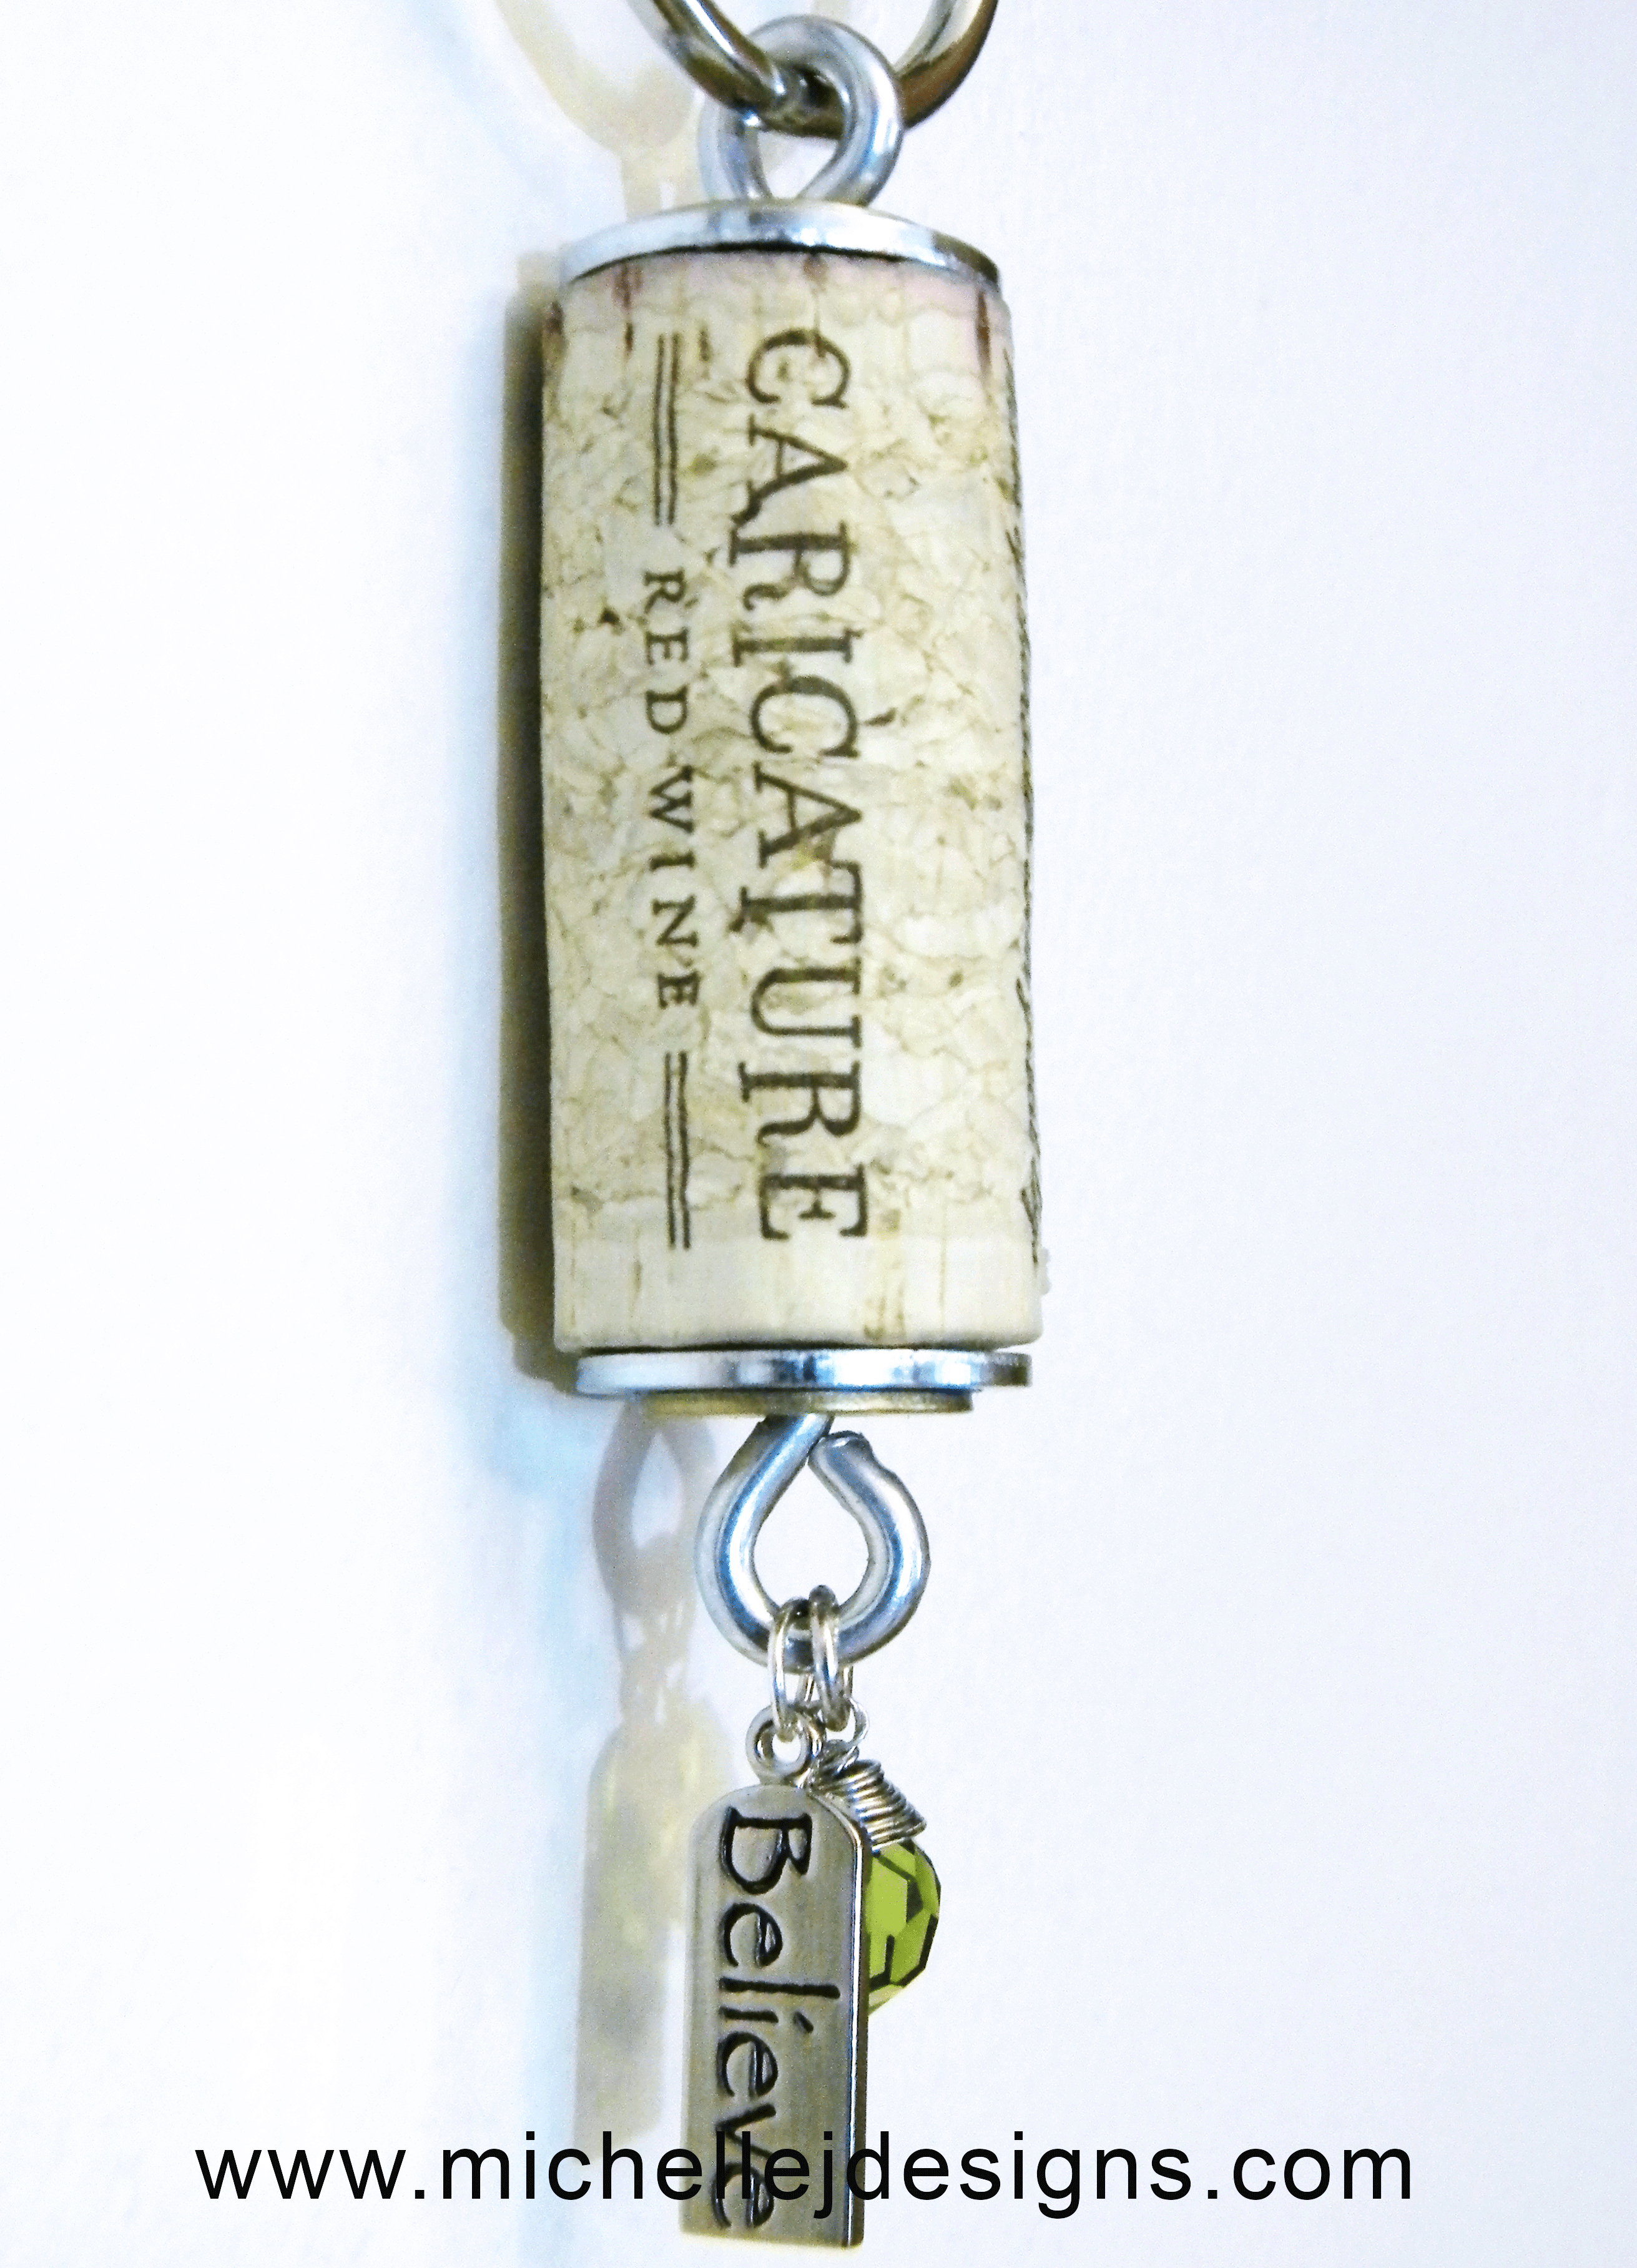 These wine cork key chains are so easy to make and are great gifts. - www.michellejdesigns.com